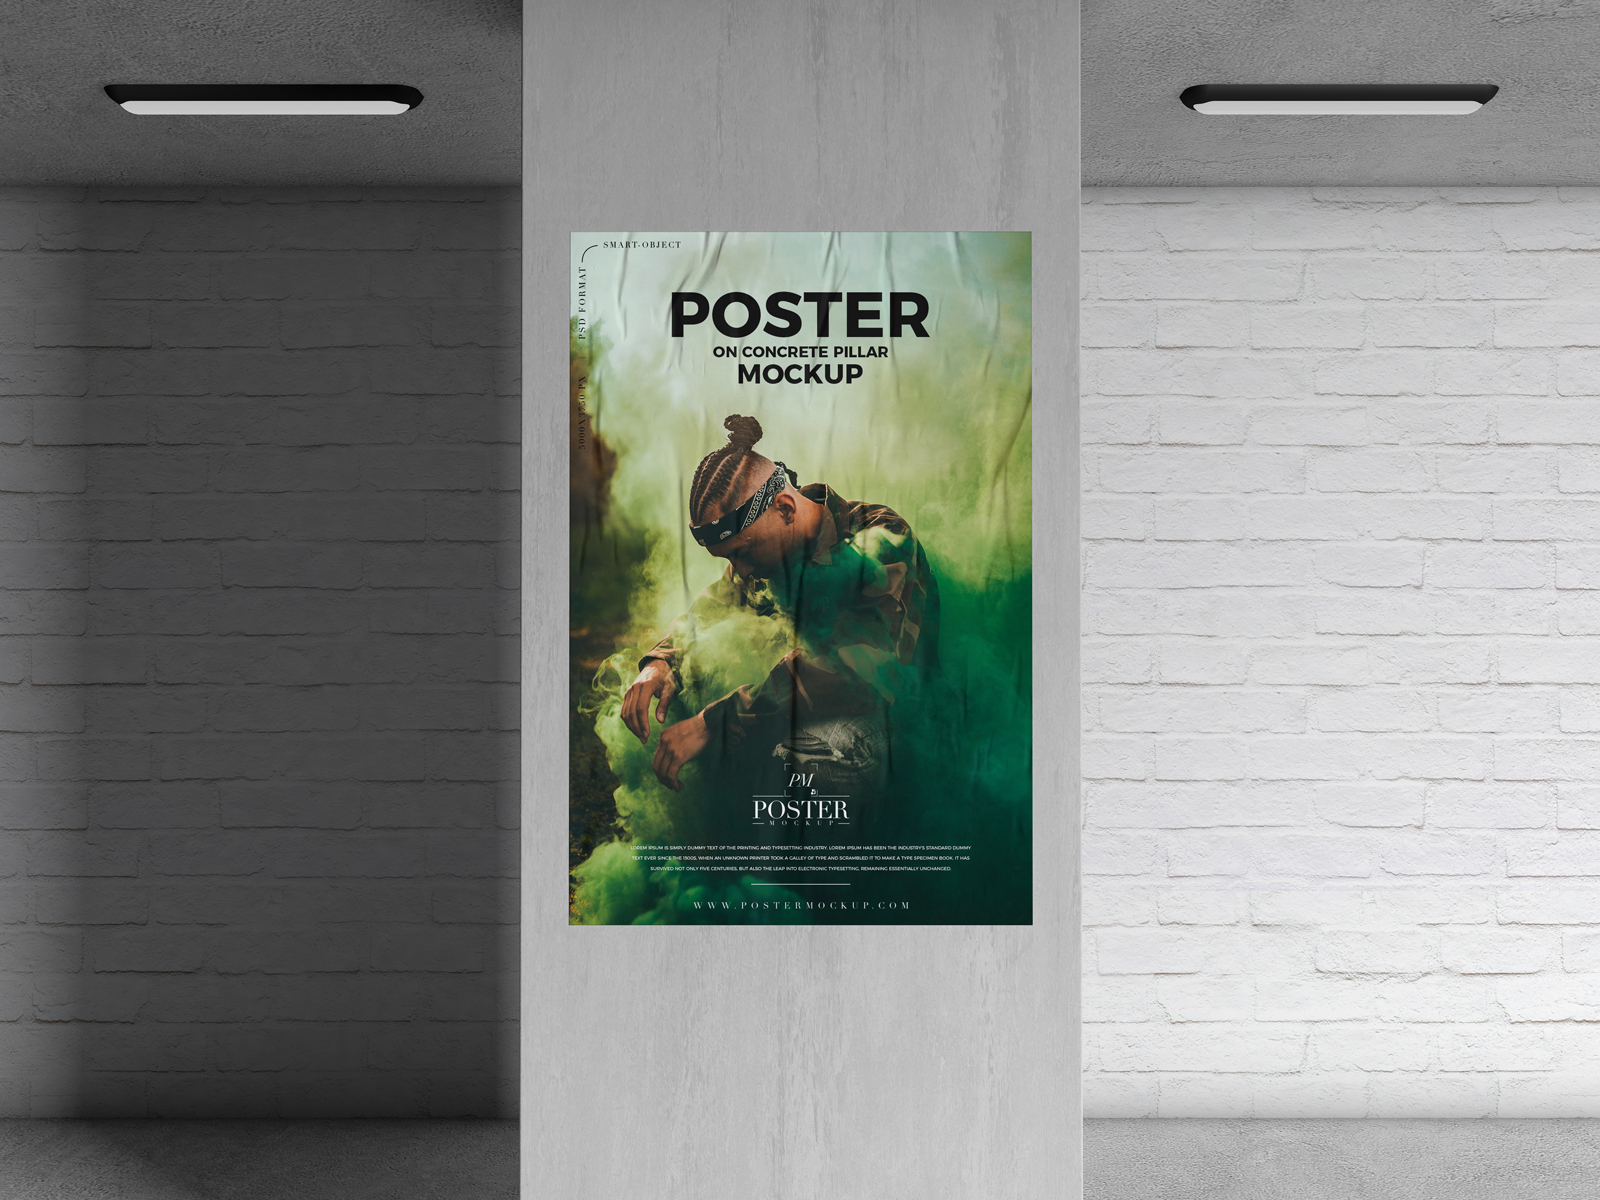 Download Concrete Pillar Poster Mockup Free by Poster Mockup on Dribbble